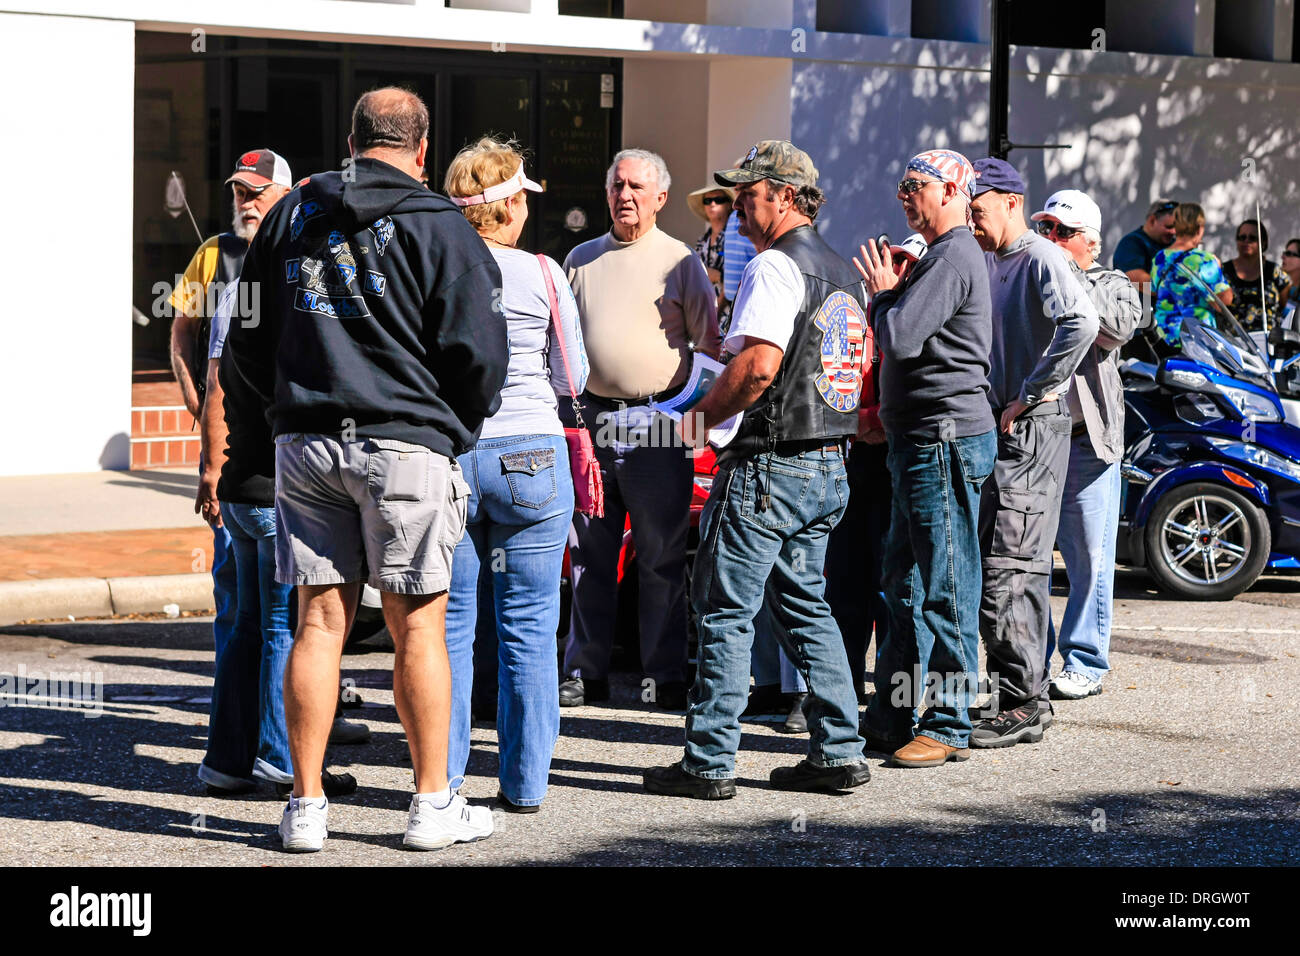 Group of Bikers talking at the Thunder by the Bay motorcycle event in Sarasota Florida Stock Photo